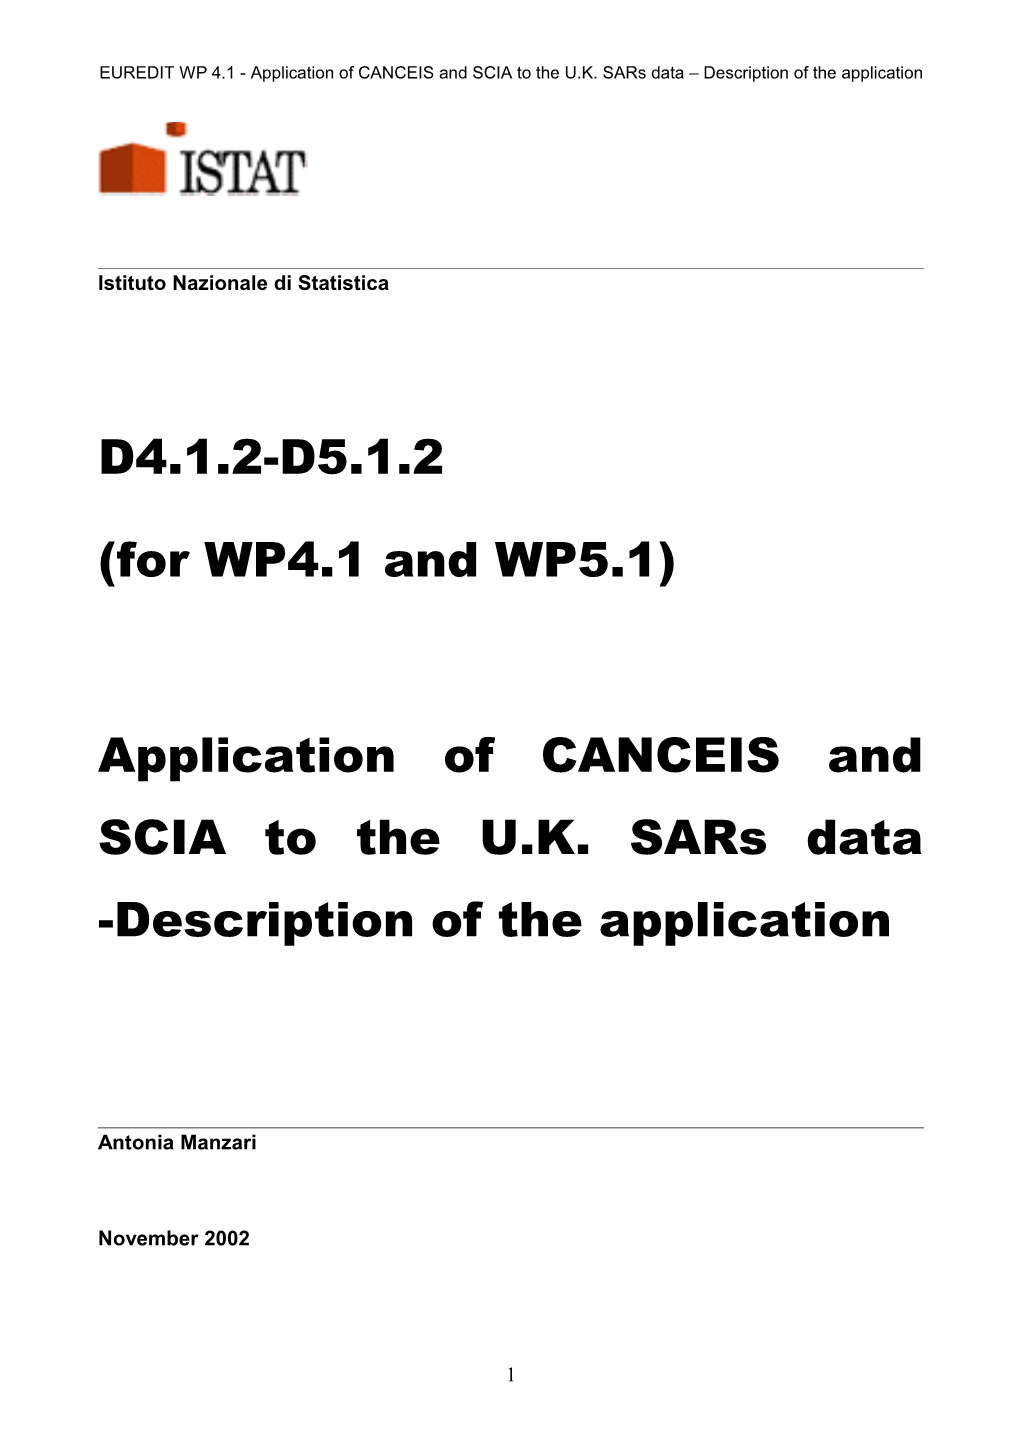 EUREDIT WP 4.1 - Application of CANCEIS and SCIA to the U.K. Sars Data Description of The